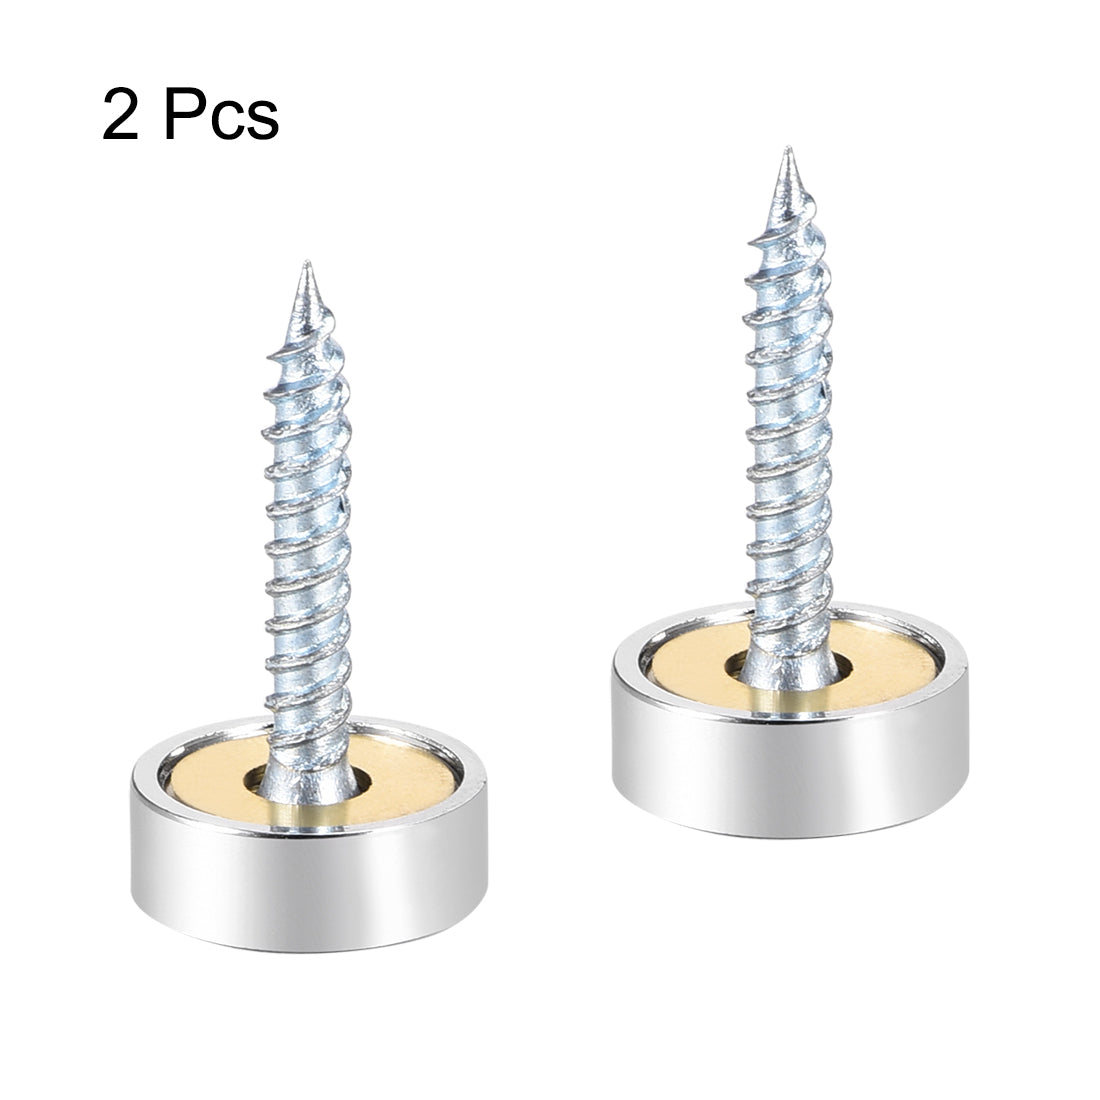 uxcell Uxcell Mirror Screws Decorative Caps Cover Stainless Steel 2pcs